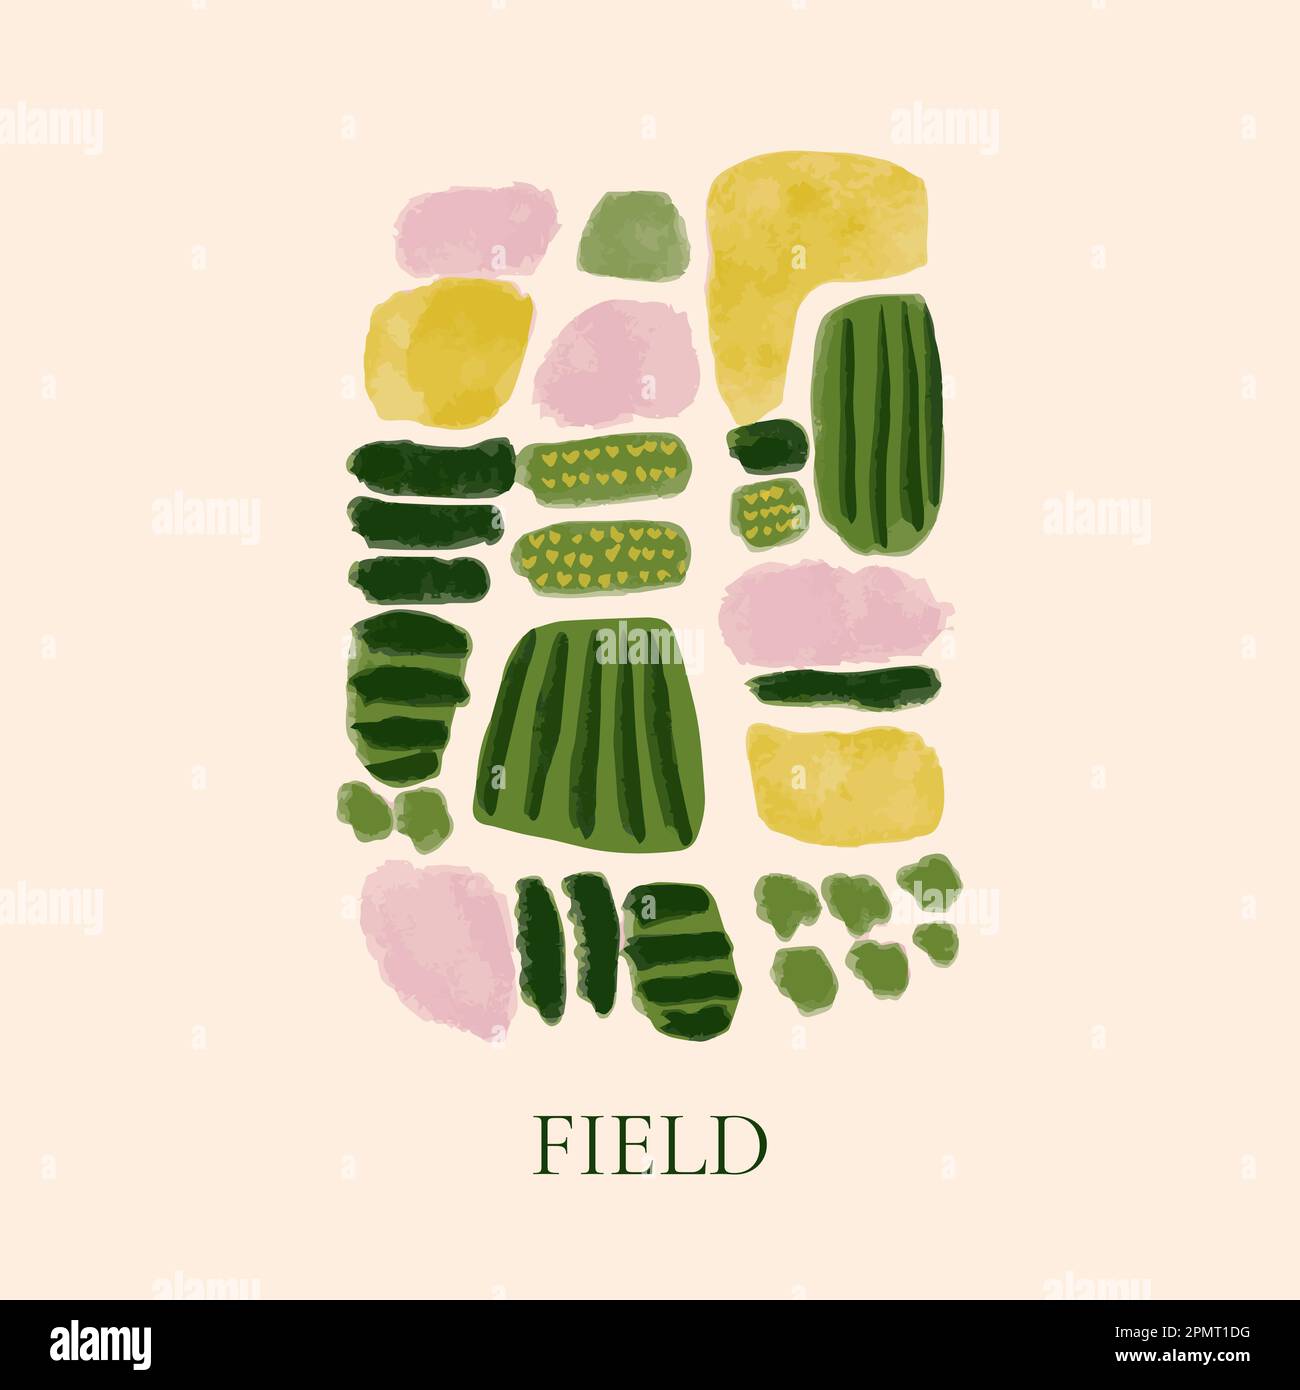 Field Aerial View Stock Vector